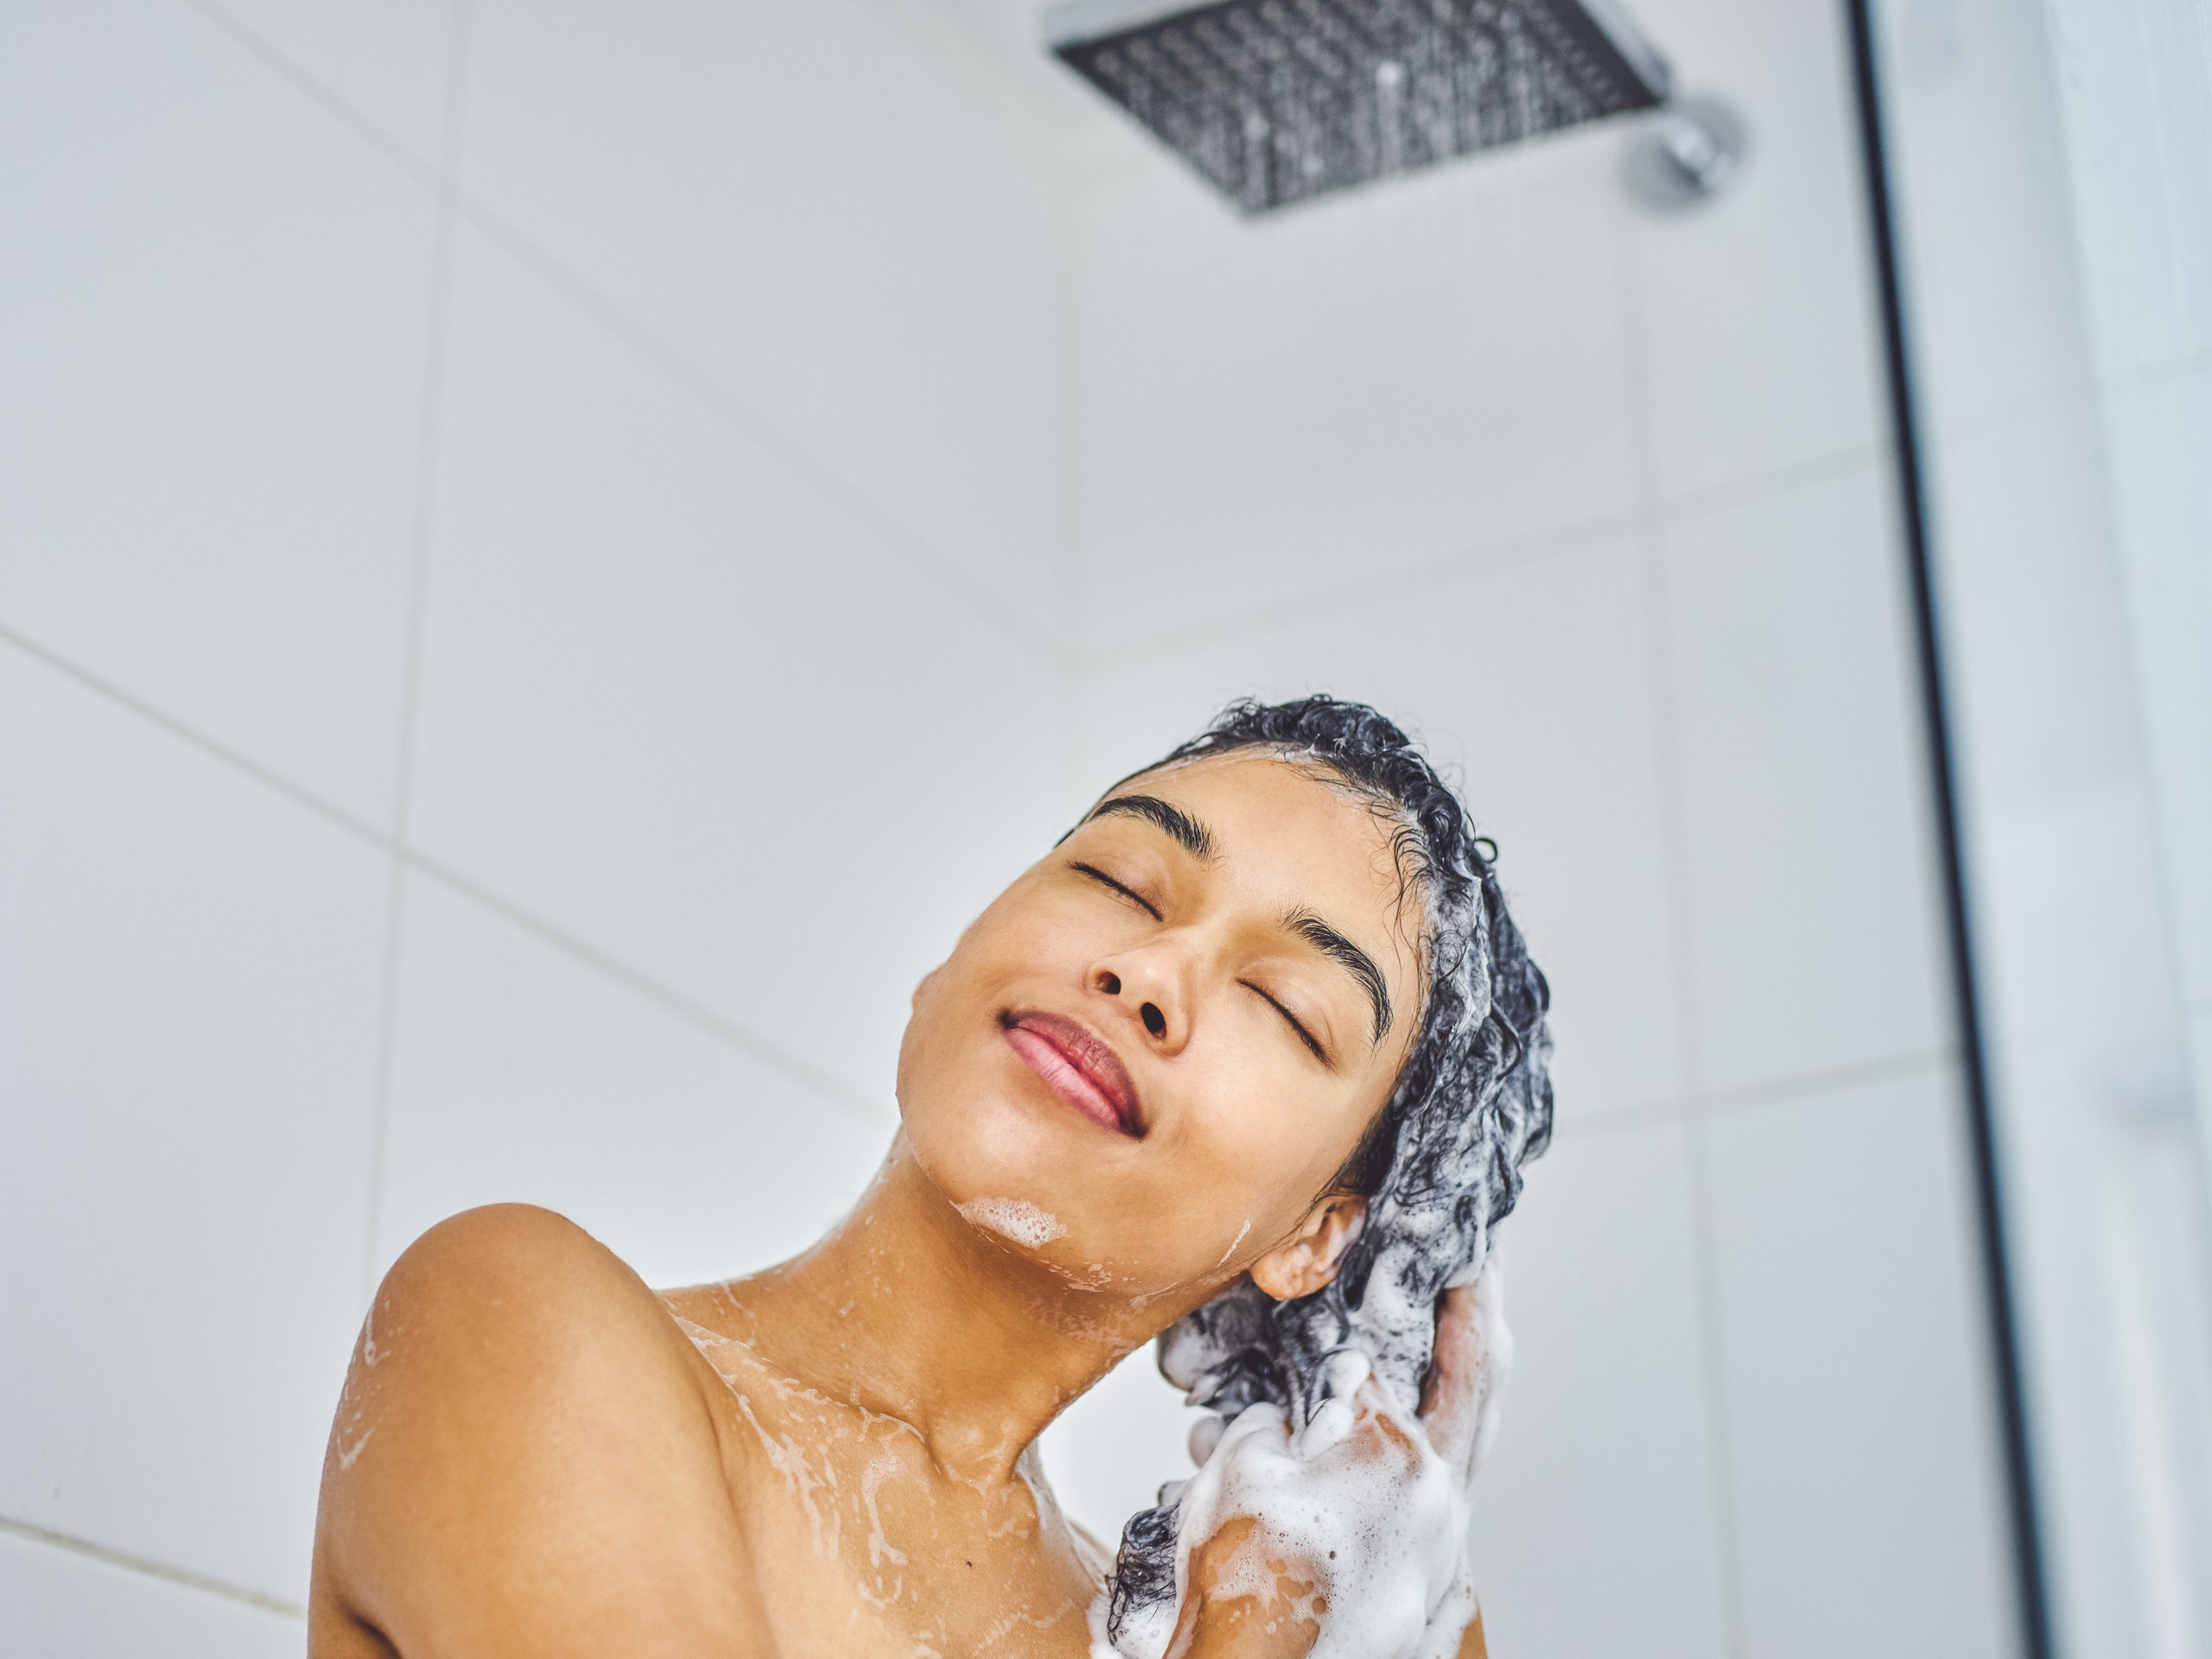 What is the Most Hygienic Thing to Wash Your Body With? 3 ef91e8c06b864d12a1daa4ed8dbd401b ef91e8c06b864d12a1daa4ed8dbd401b